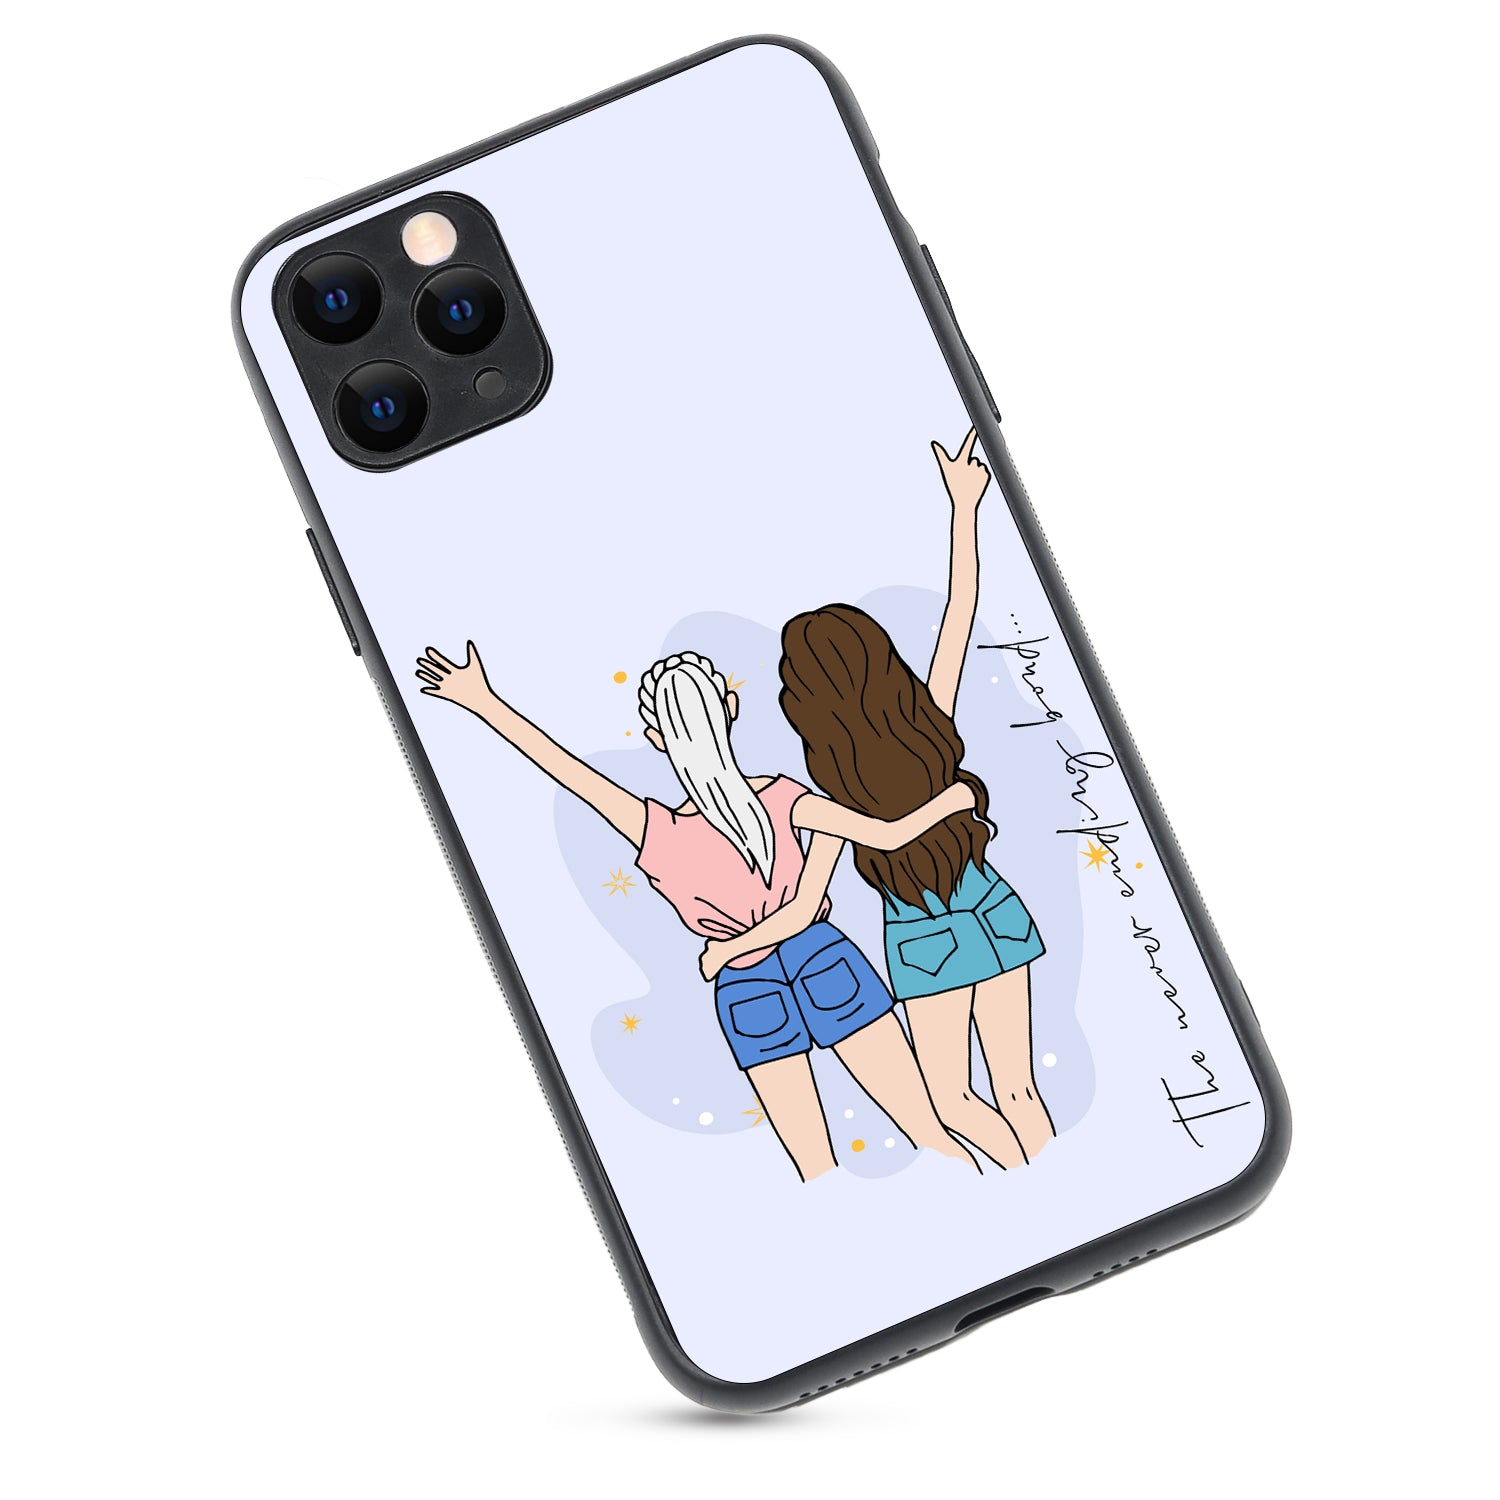 Girl Bff iPhone 11 Pro Max Case